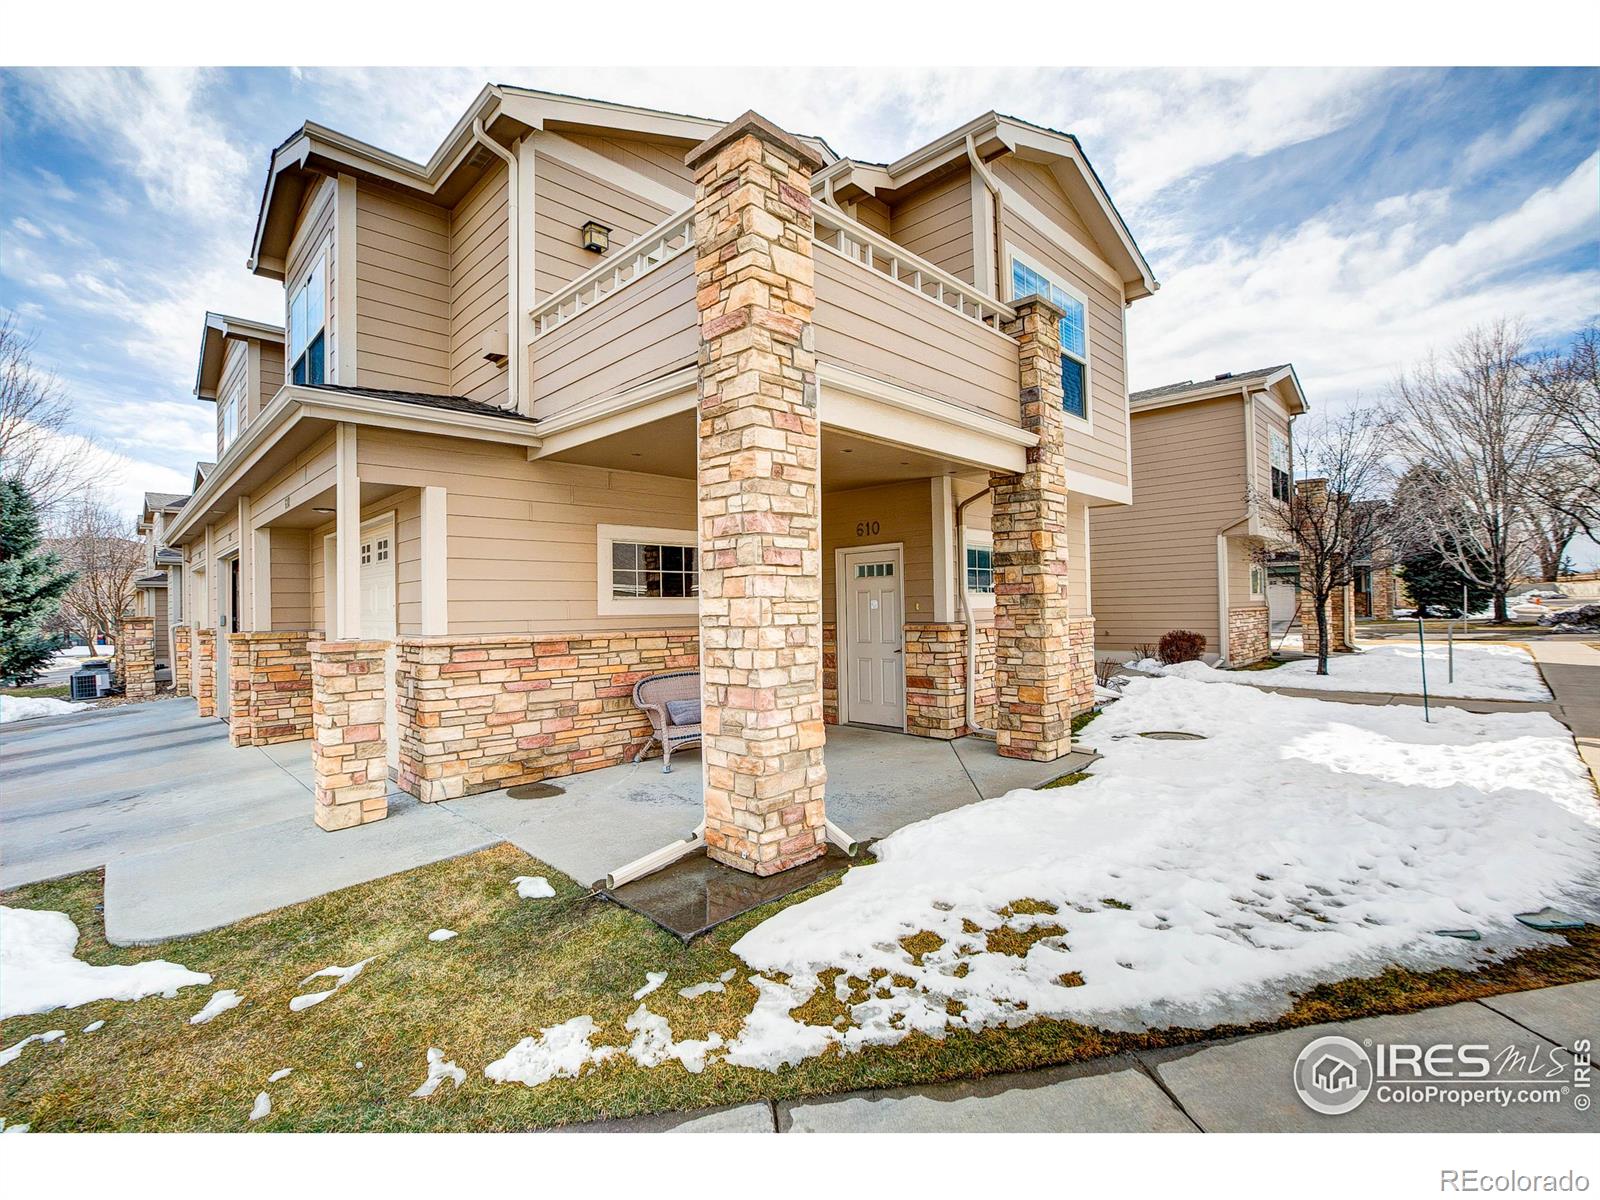 Report Image for 5775 W 29th Street,Greeley, Colorado